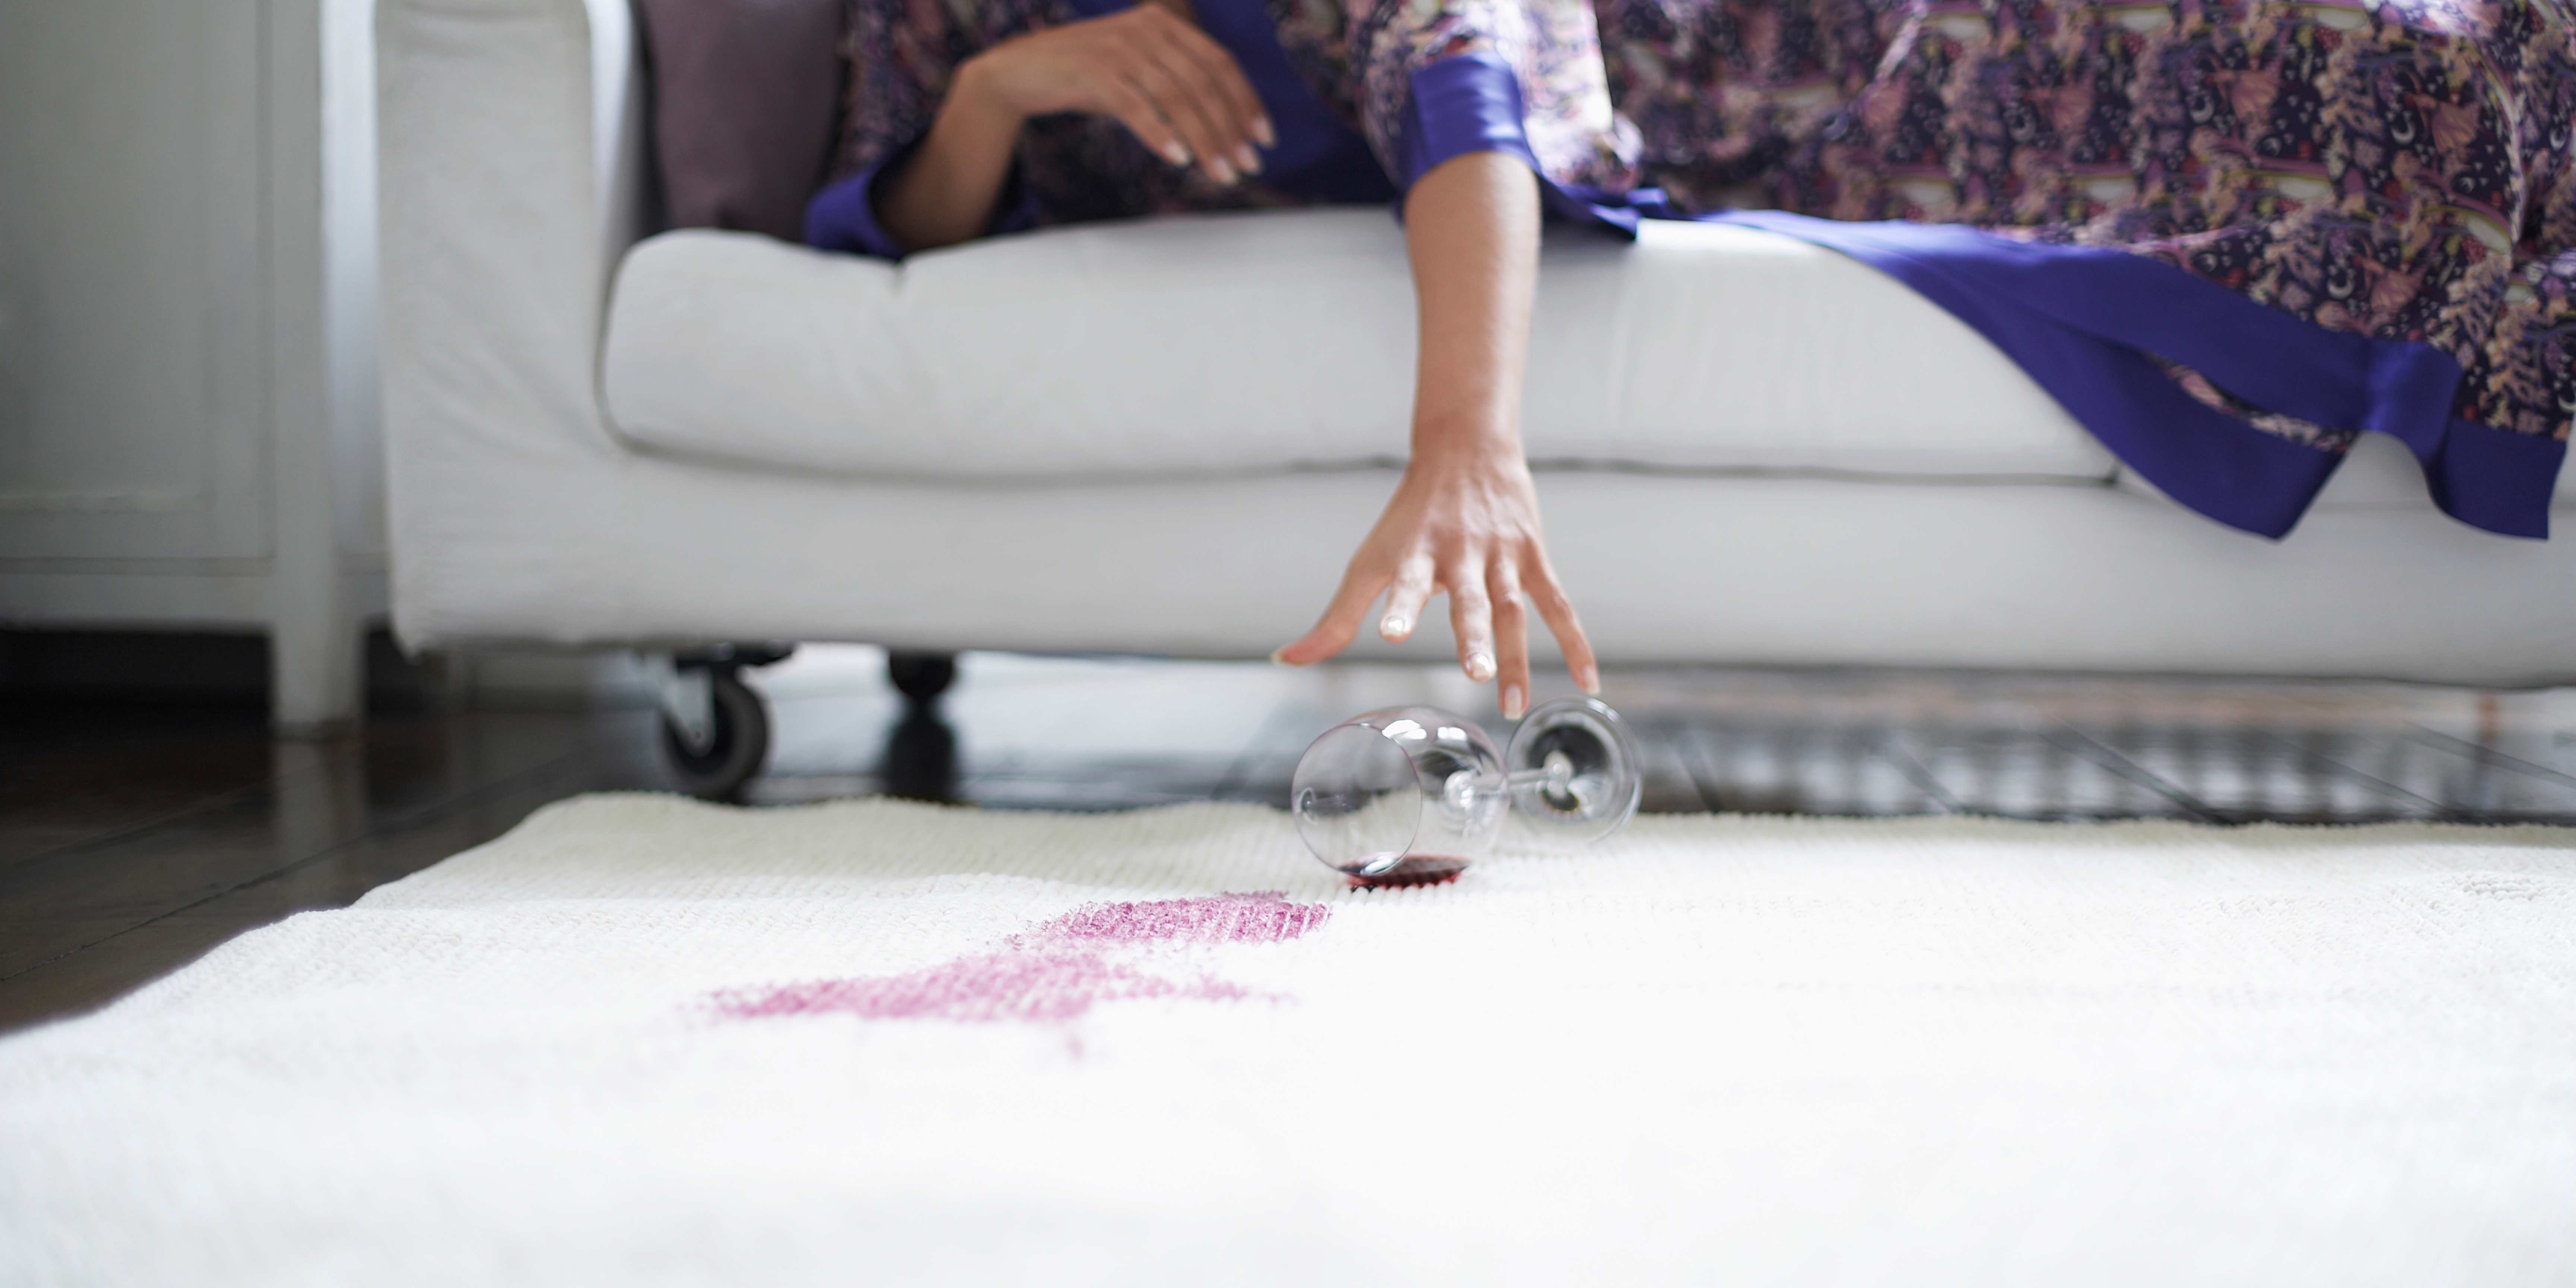 Tips for removing red wine from your carpet or rug